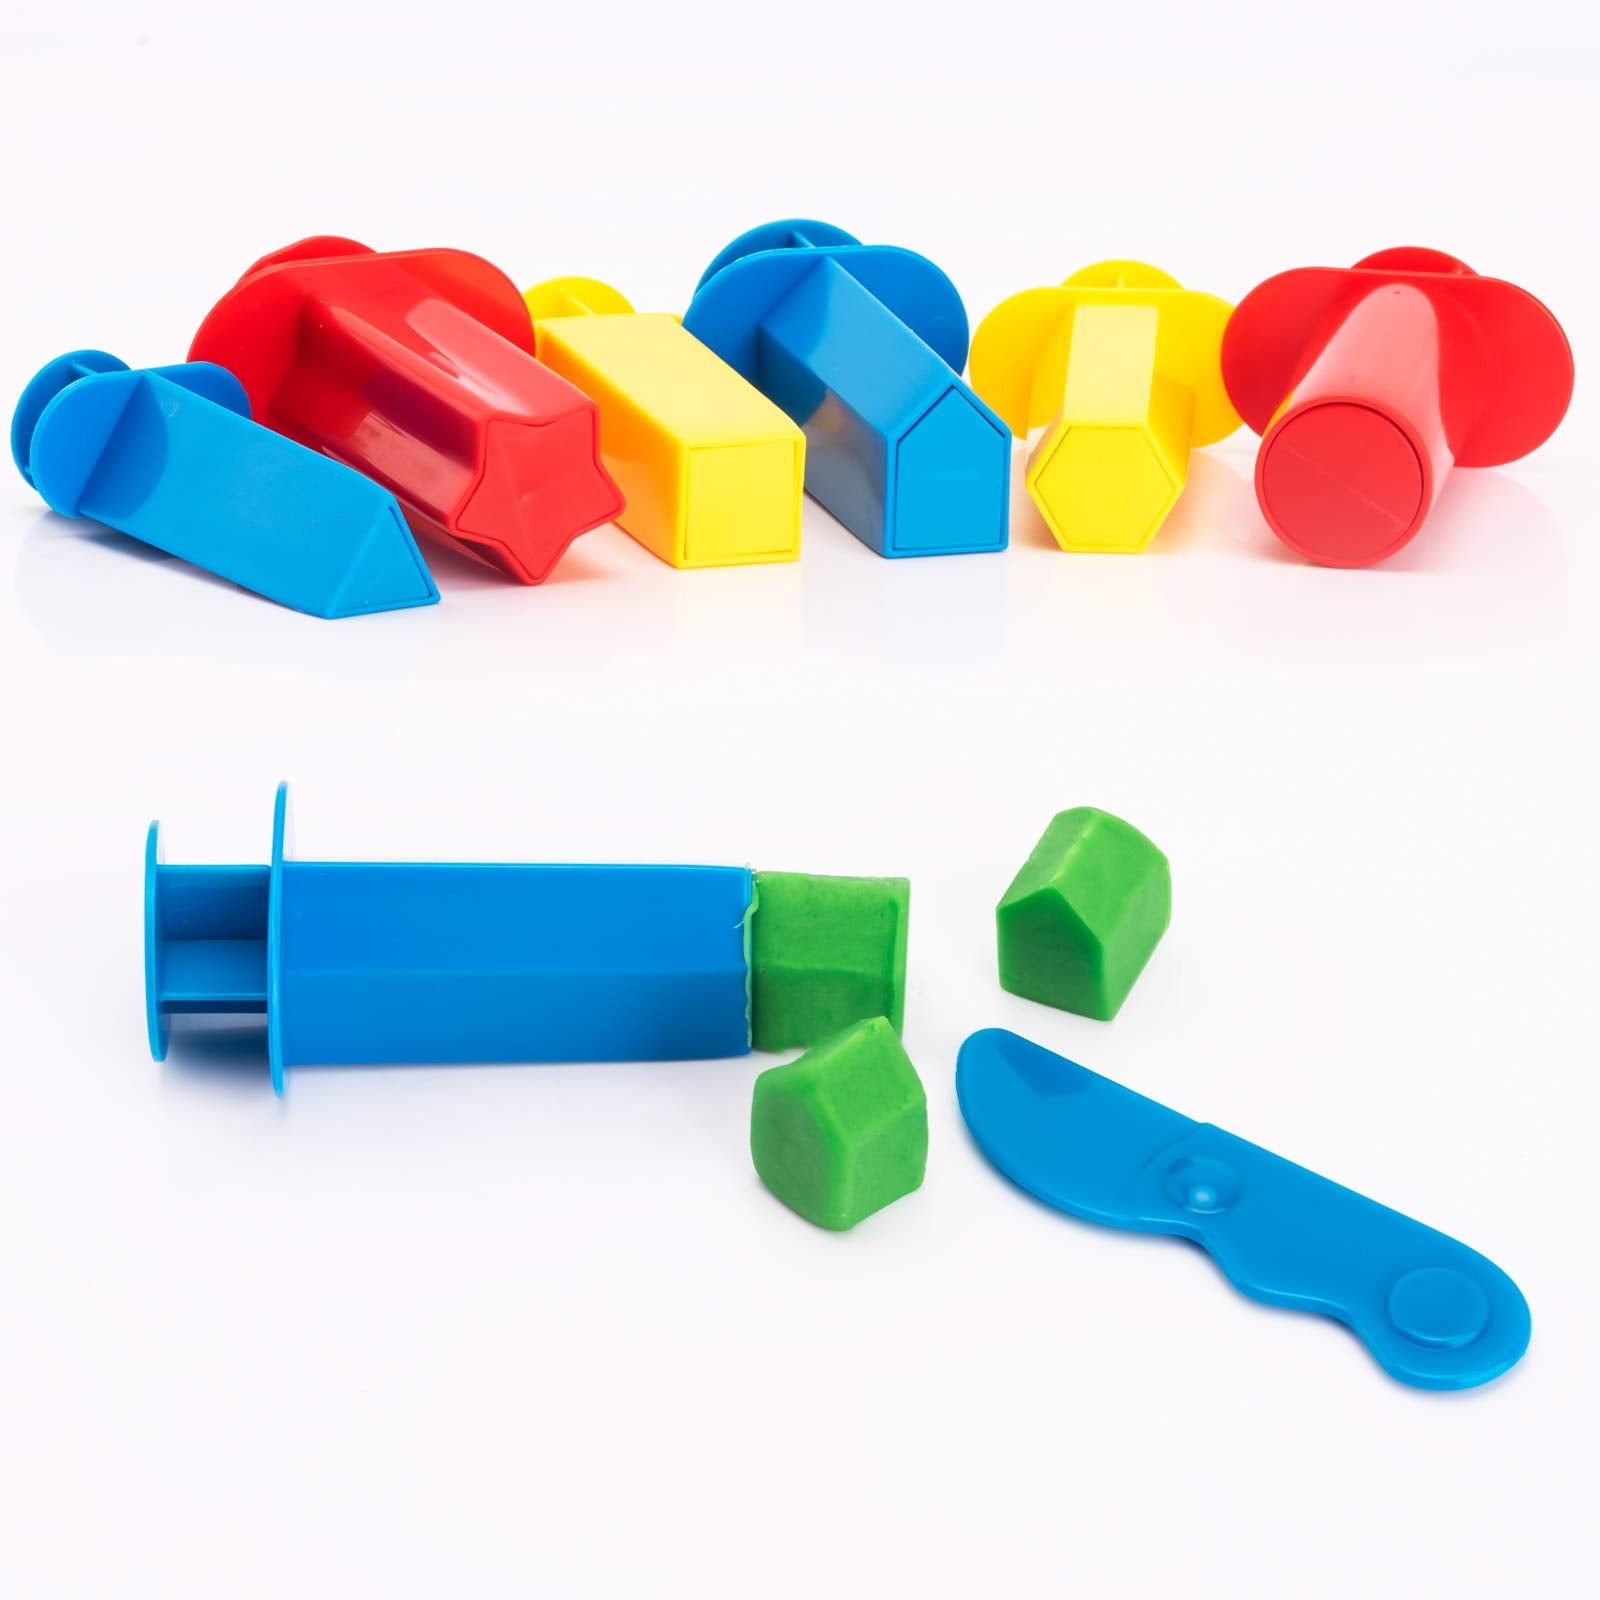 Maykid Play Dough Tools for Kids, 46PCS Playdough Tools Kit Include Dough Accessory Molds Rollers Cutters Scissors and Storage Bag